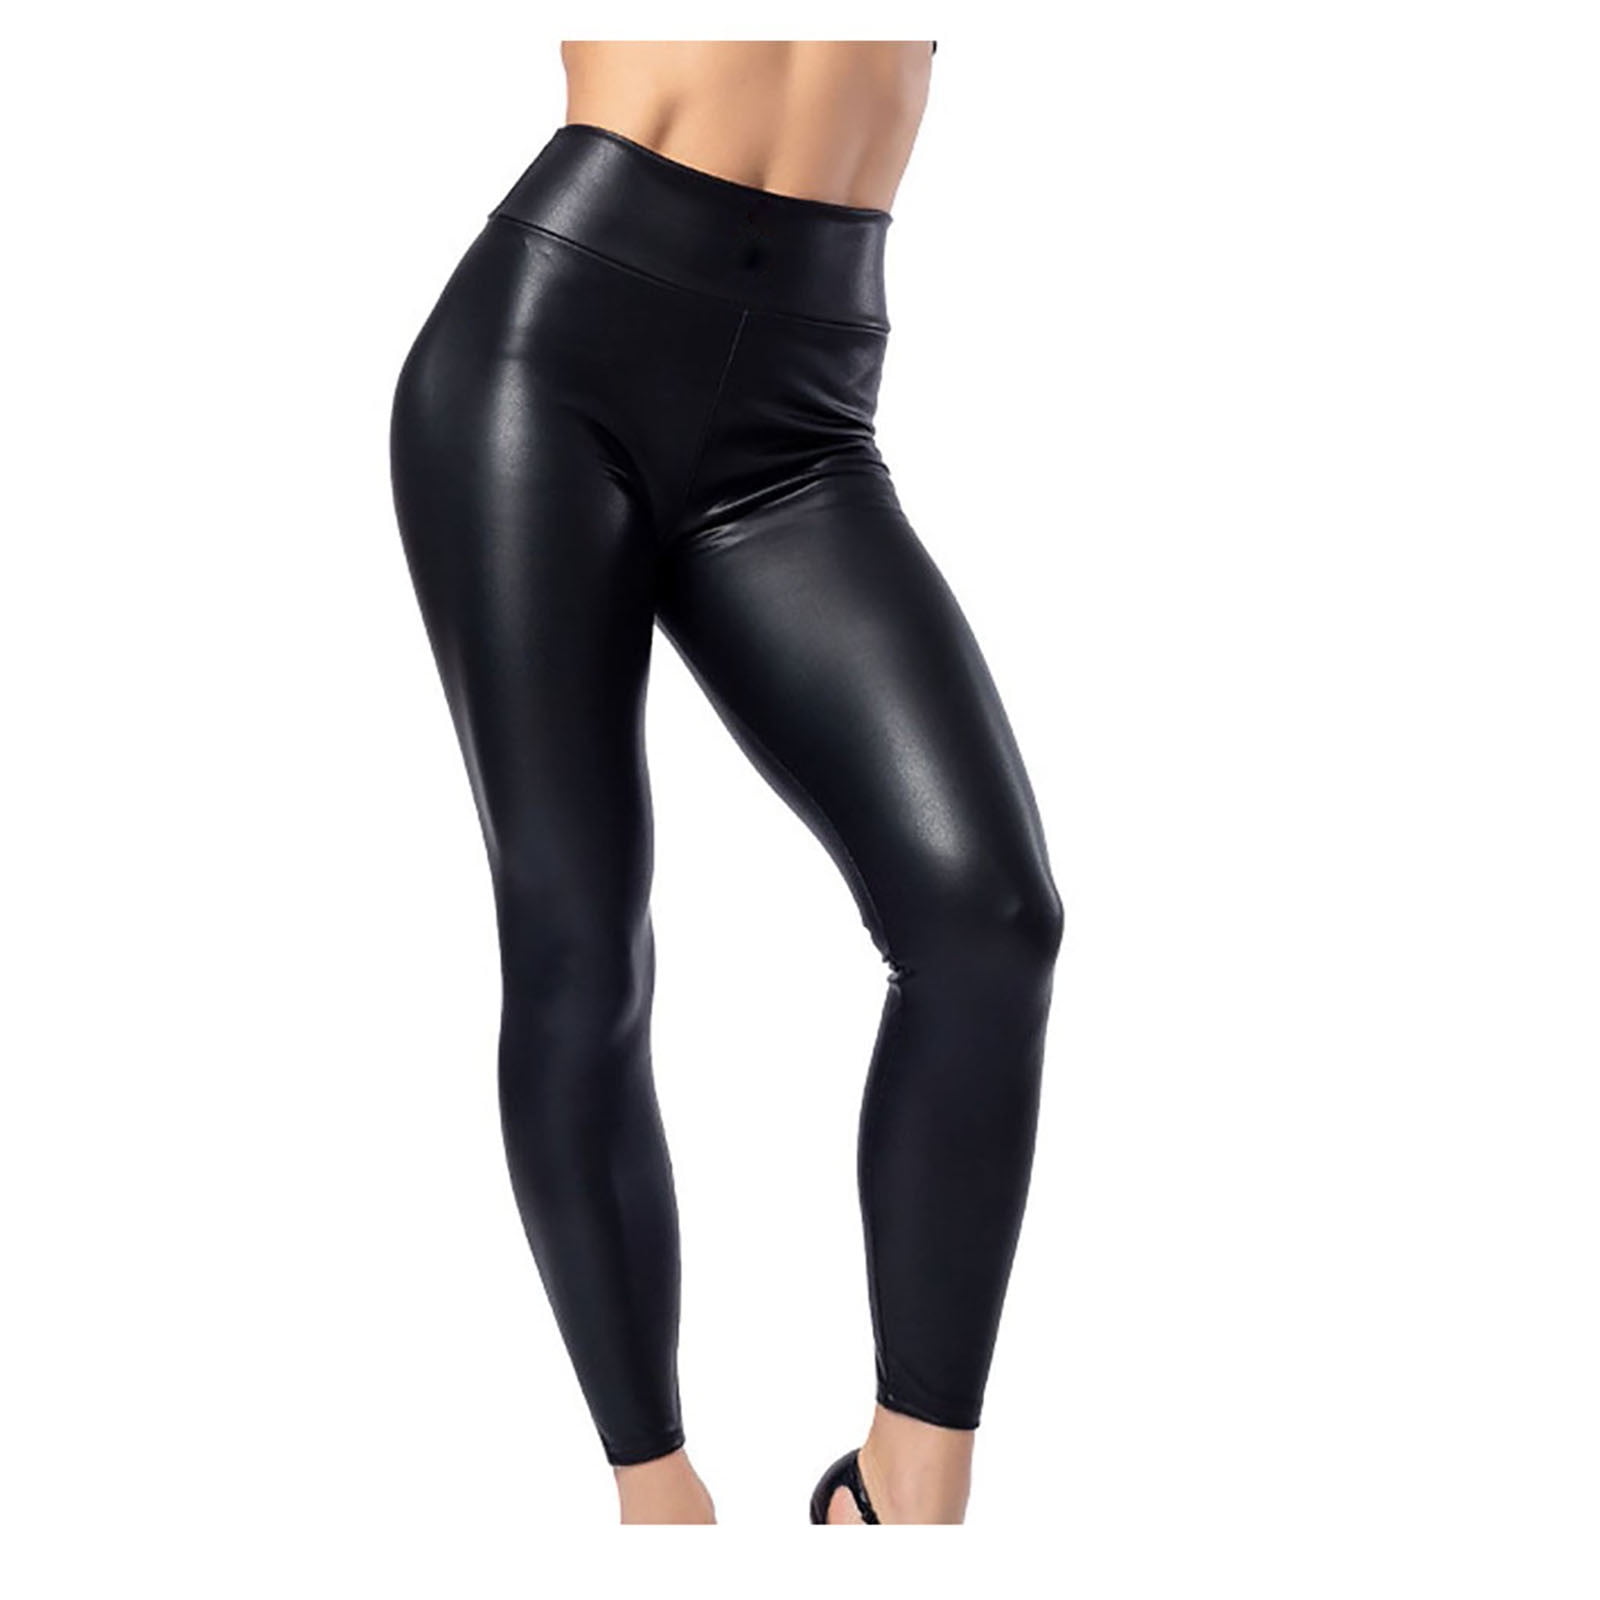  Lroplie Black Leather Pants Women Thick Sweatpants for